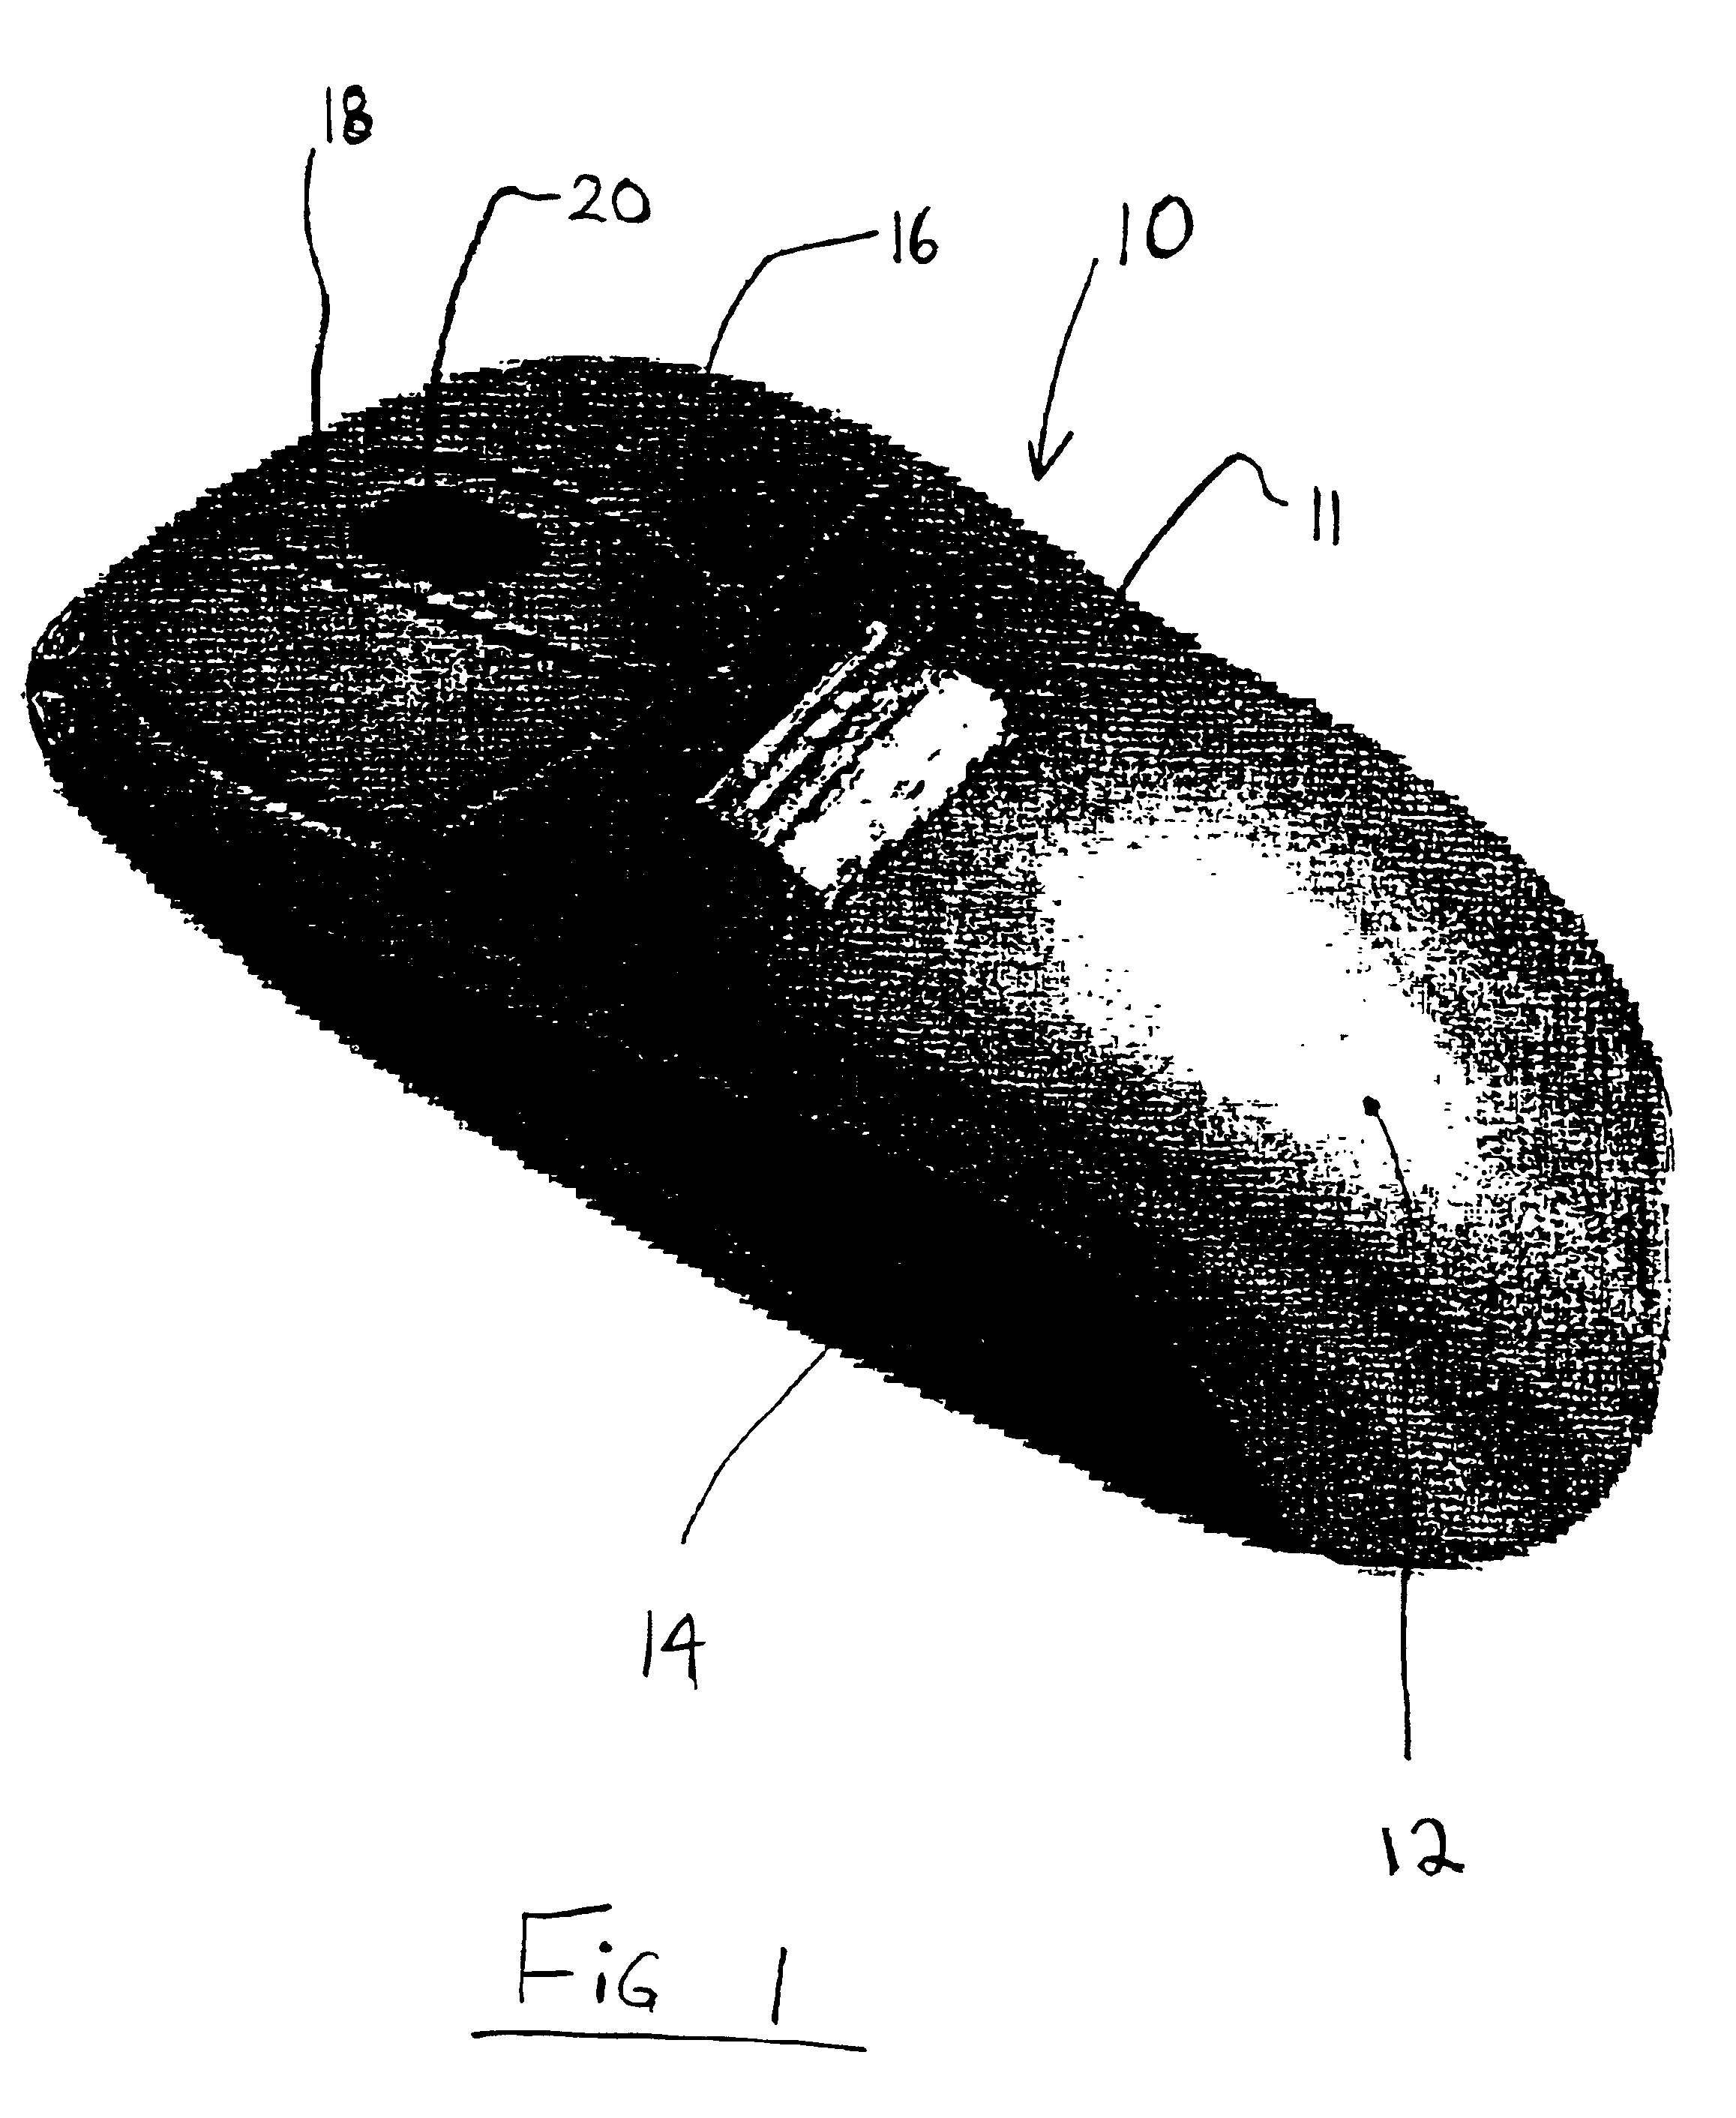 Self-powered cordless mouse